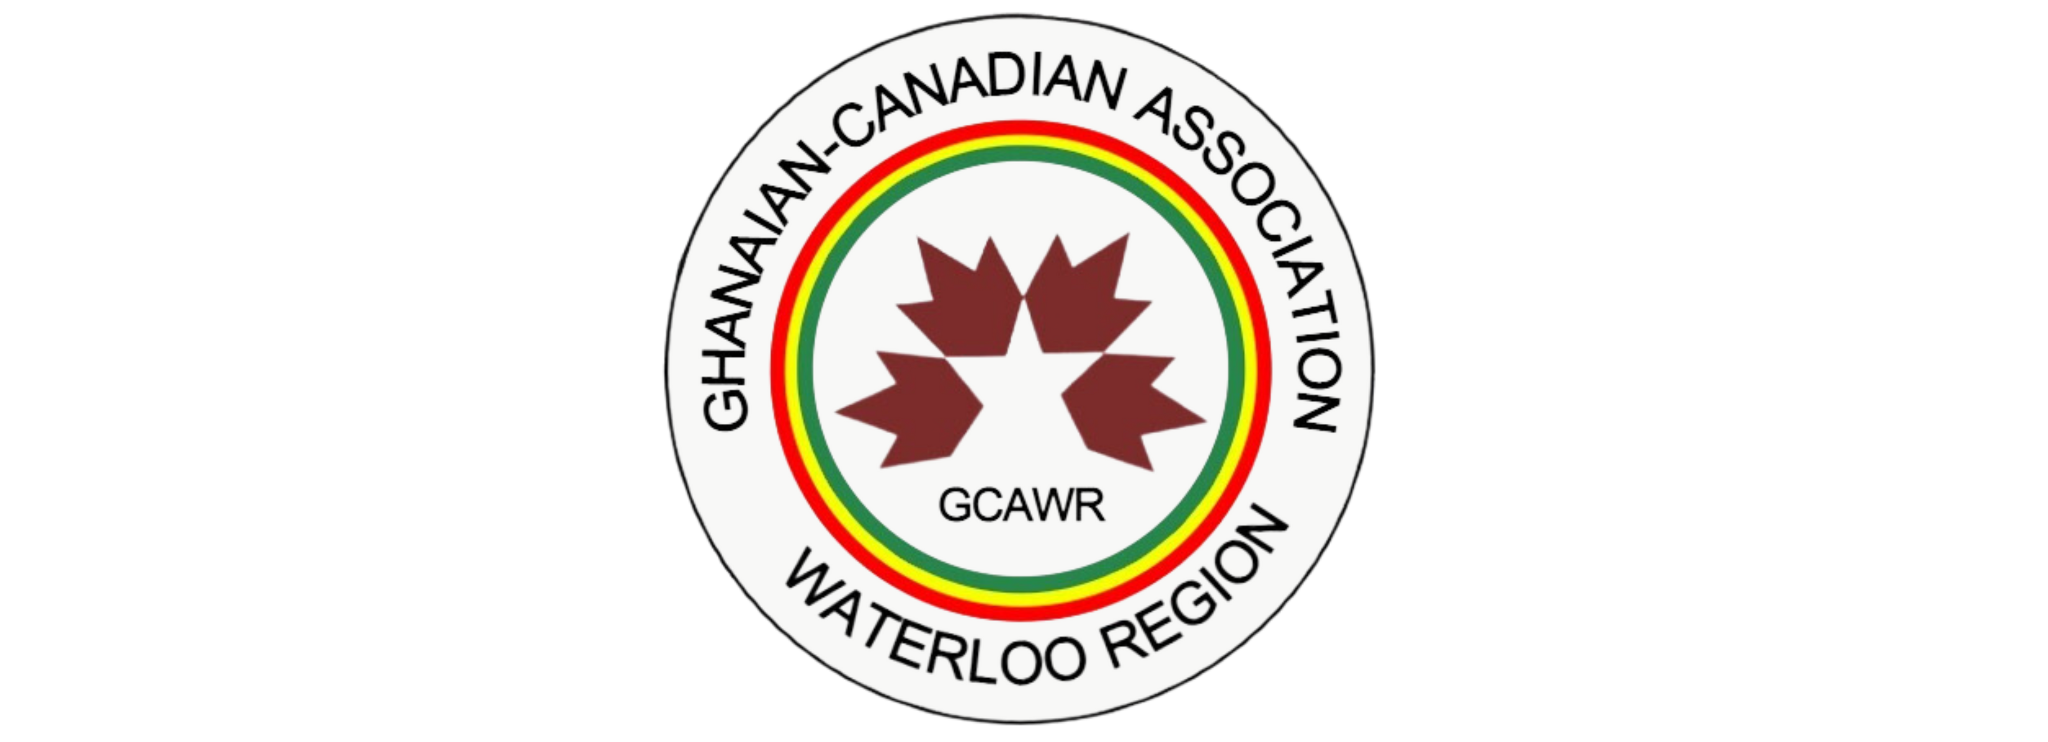 Logo of the Ghanaian-Canadian Association of Waterloo Region (GCAWR) with three red maple leaves in the center and text surrounding it in a white oval. Toronto Caribana Carnival: Ultimate Guide to Caribana Festival Events